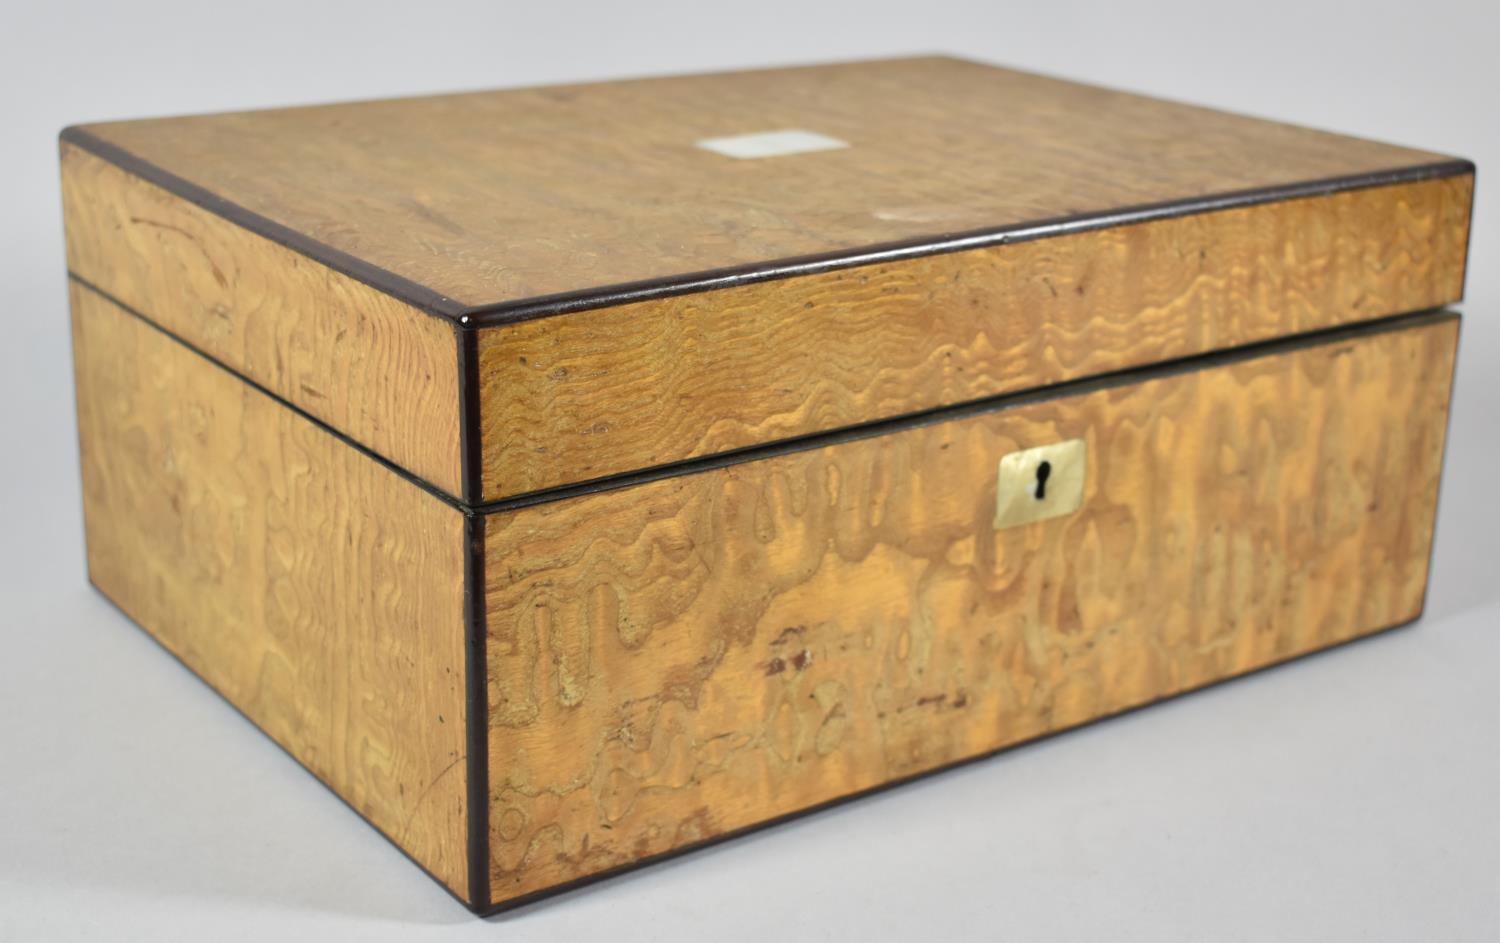 A 19th Century Ladies Work Box by Parkins & Gotto, Having Silk Lined Interior but Missing Inner